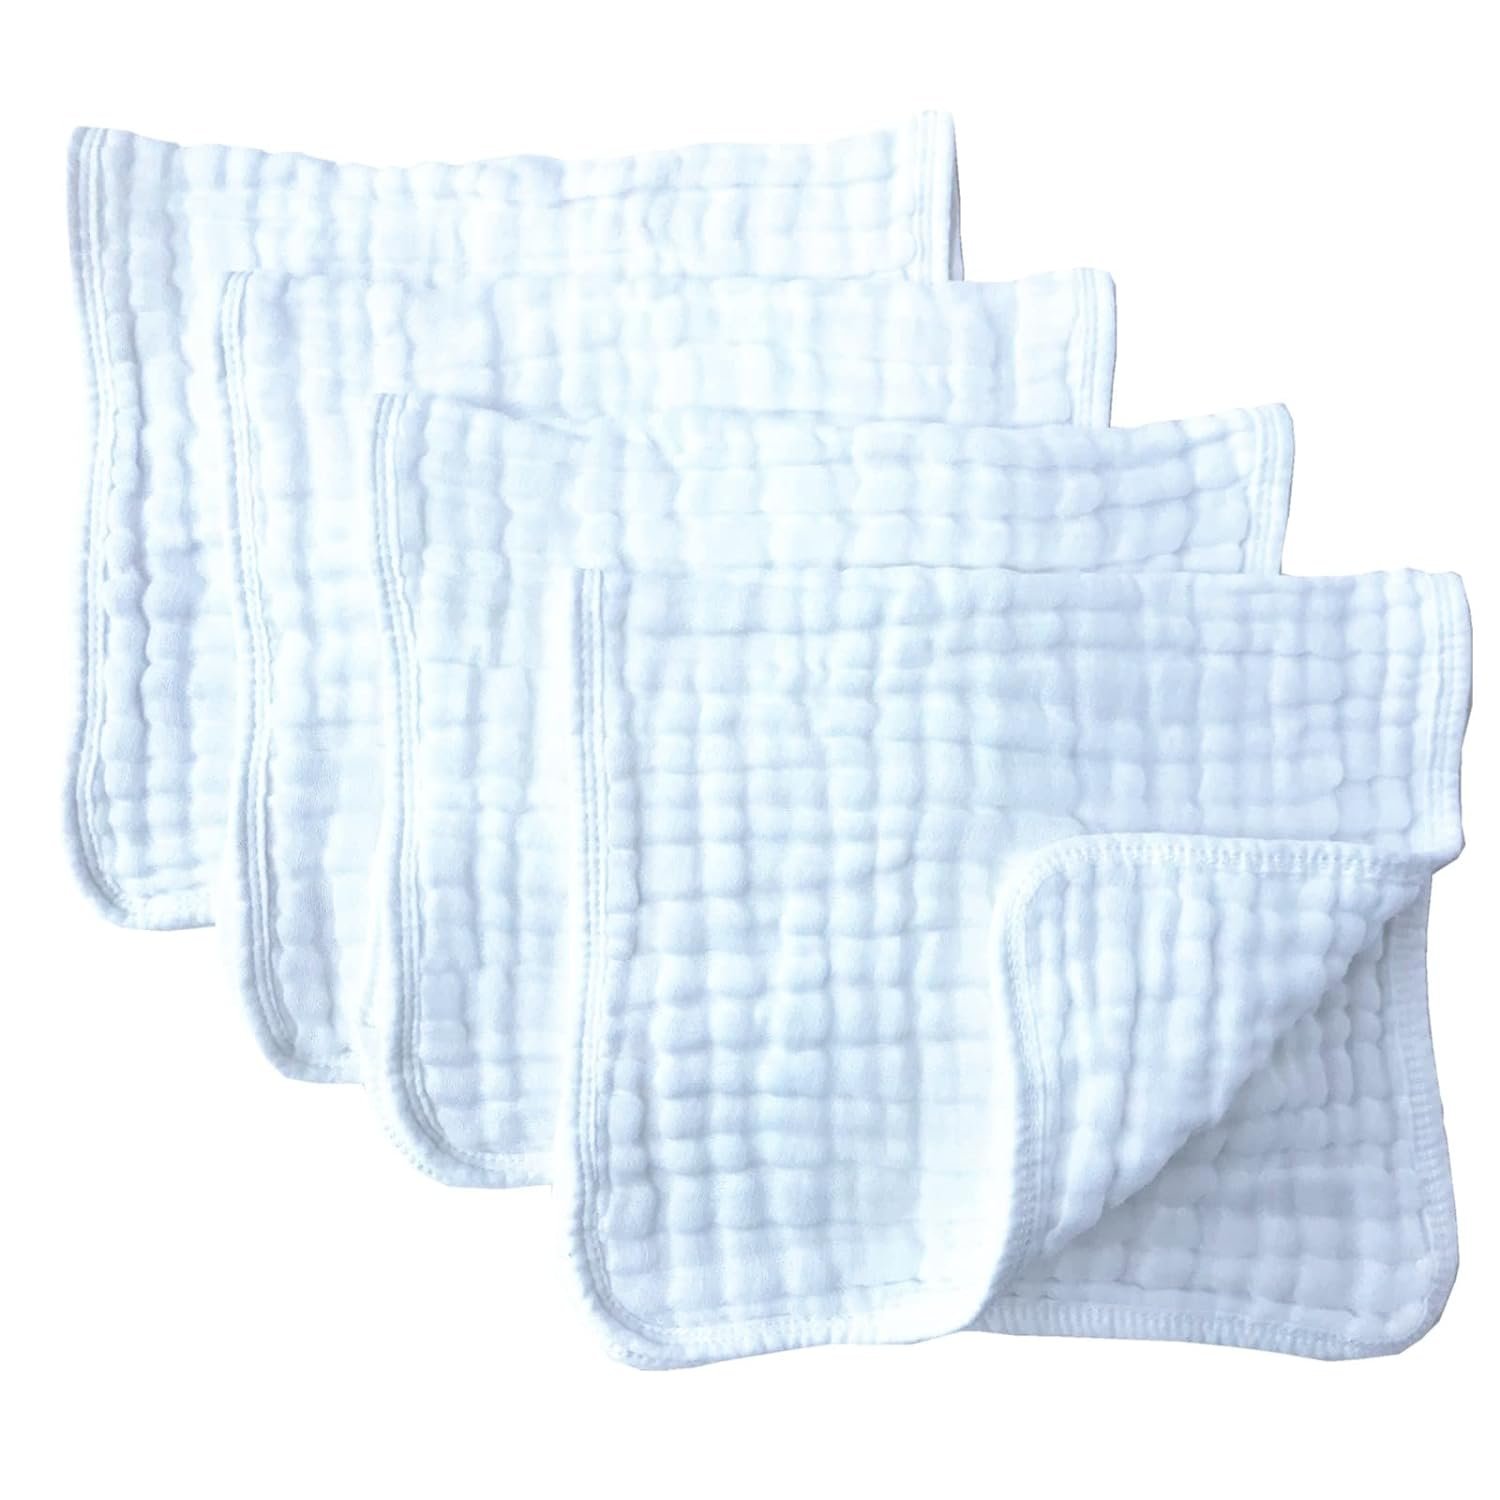 Synrroe Muslin Burp Cloths 4 Pack Large 20 by 10 100% Cotton 6 Layers Extra Absorbent and Soft